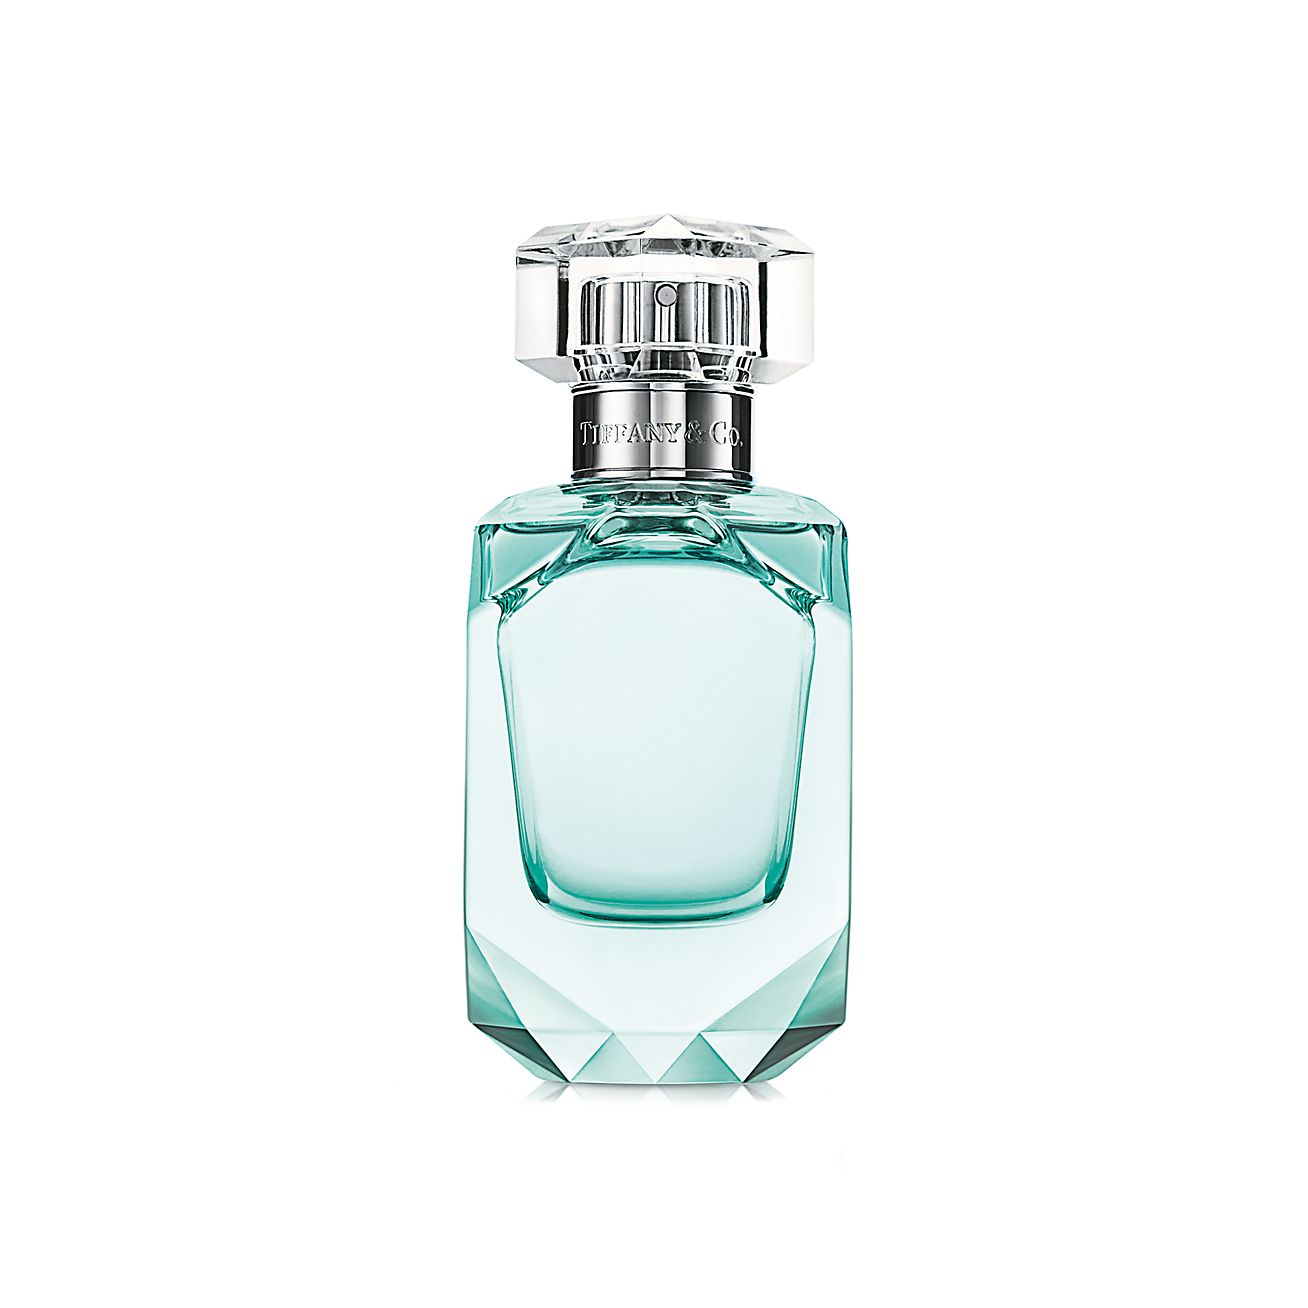 best price for tiffany perfume